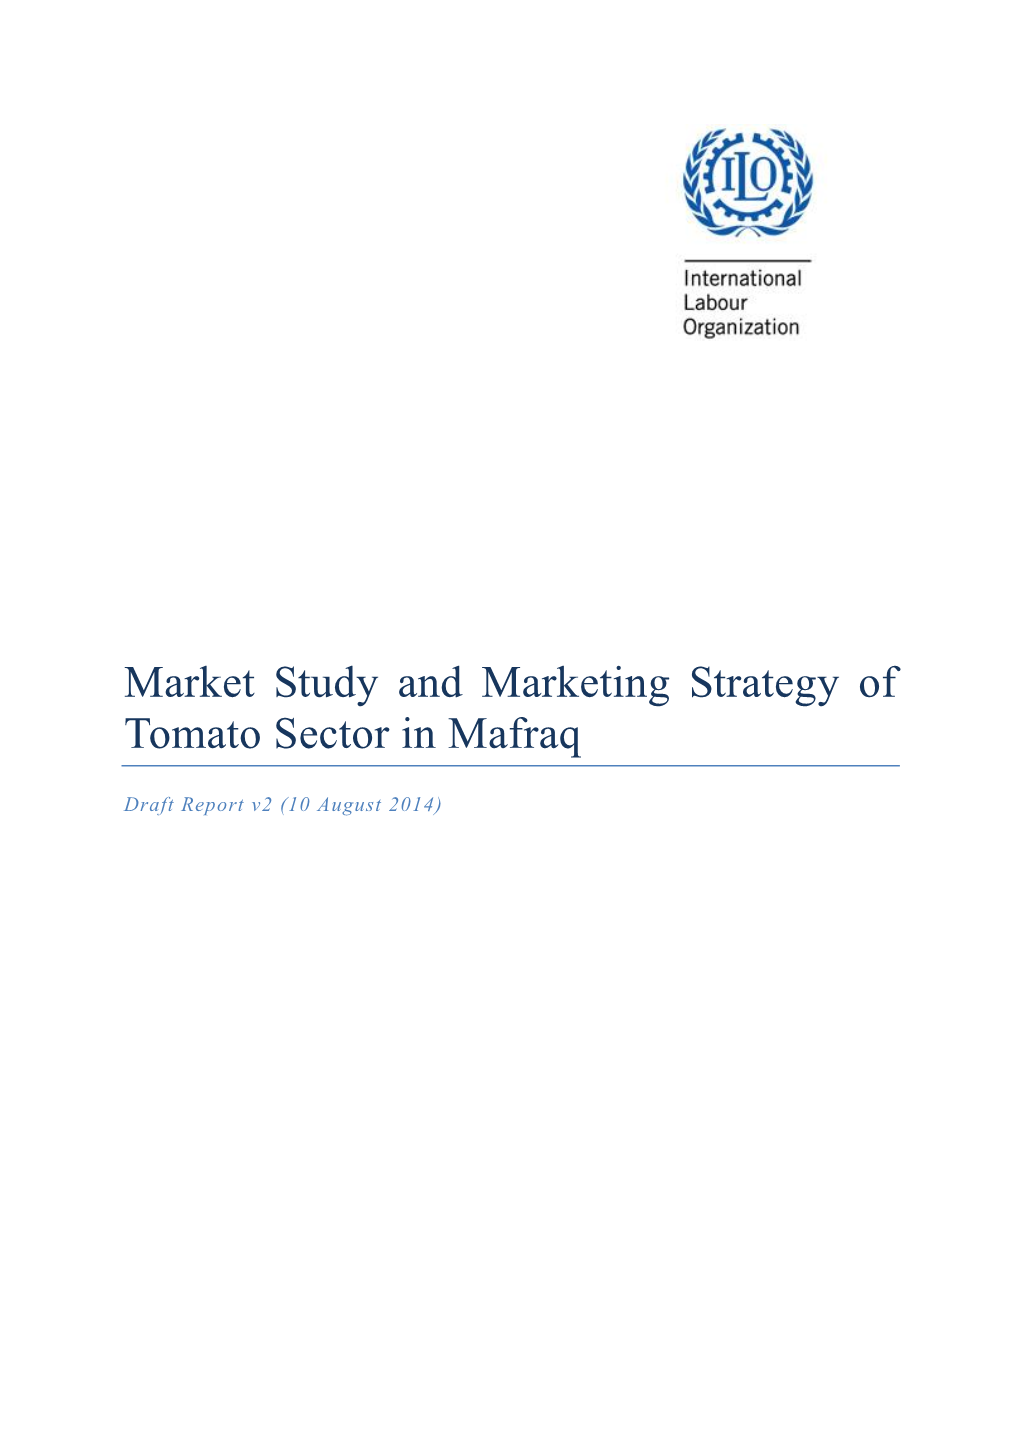 Market Study and Marketing Strategy of Tomato Sector in Mafraq